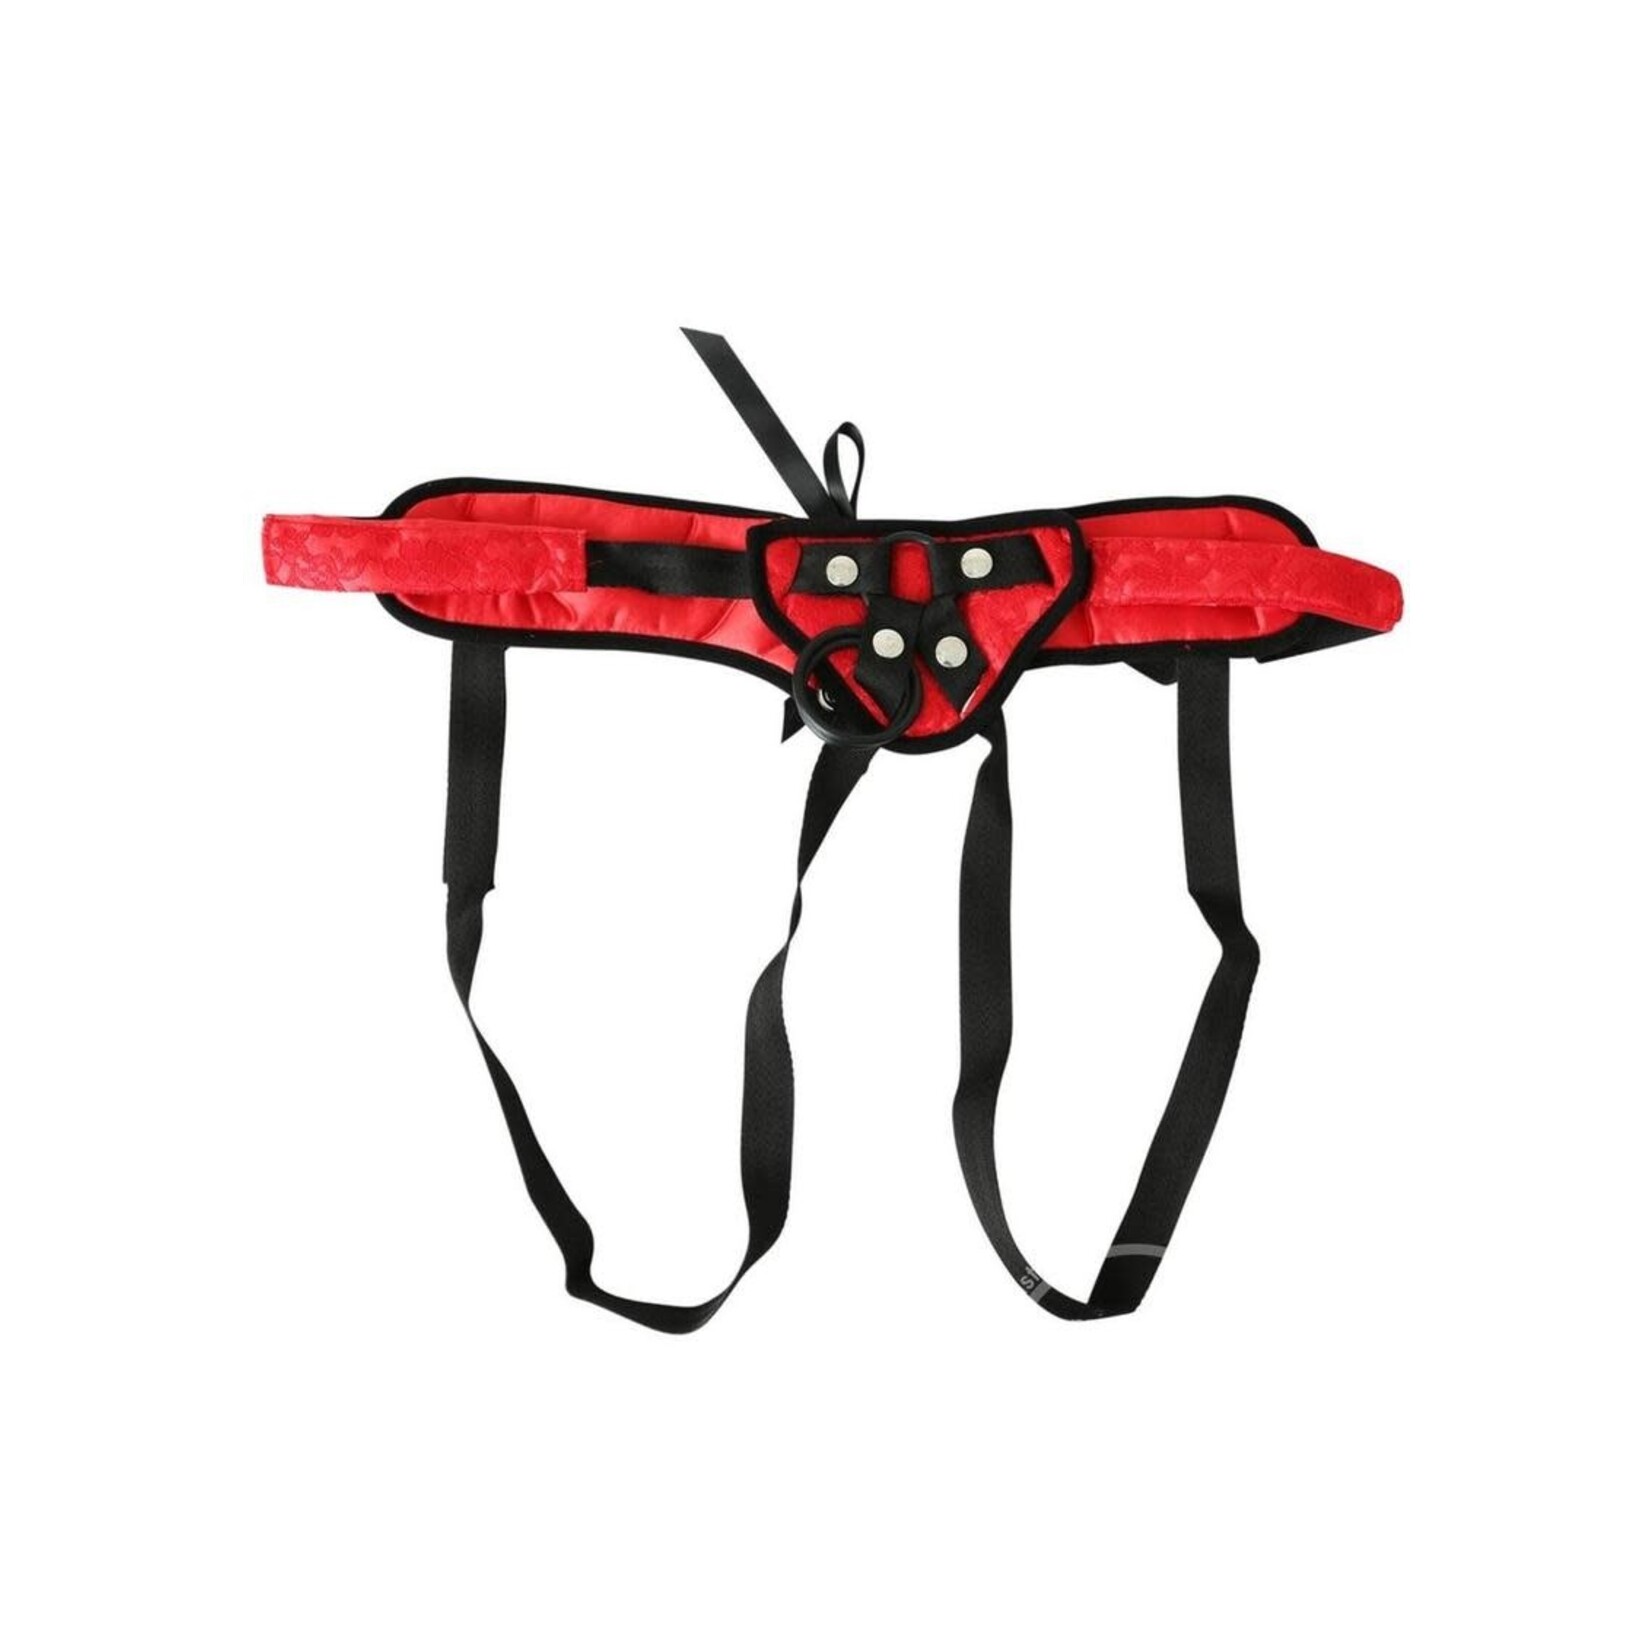 Sportsheets Sunrice Lace Corsette Strap-On Adjustable Harness - Red/Black